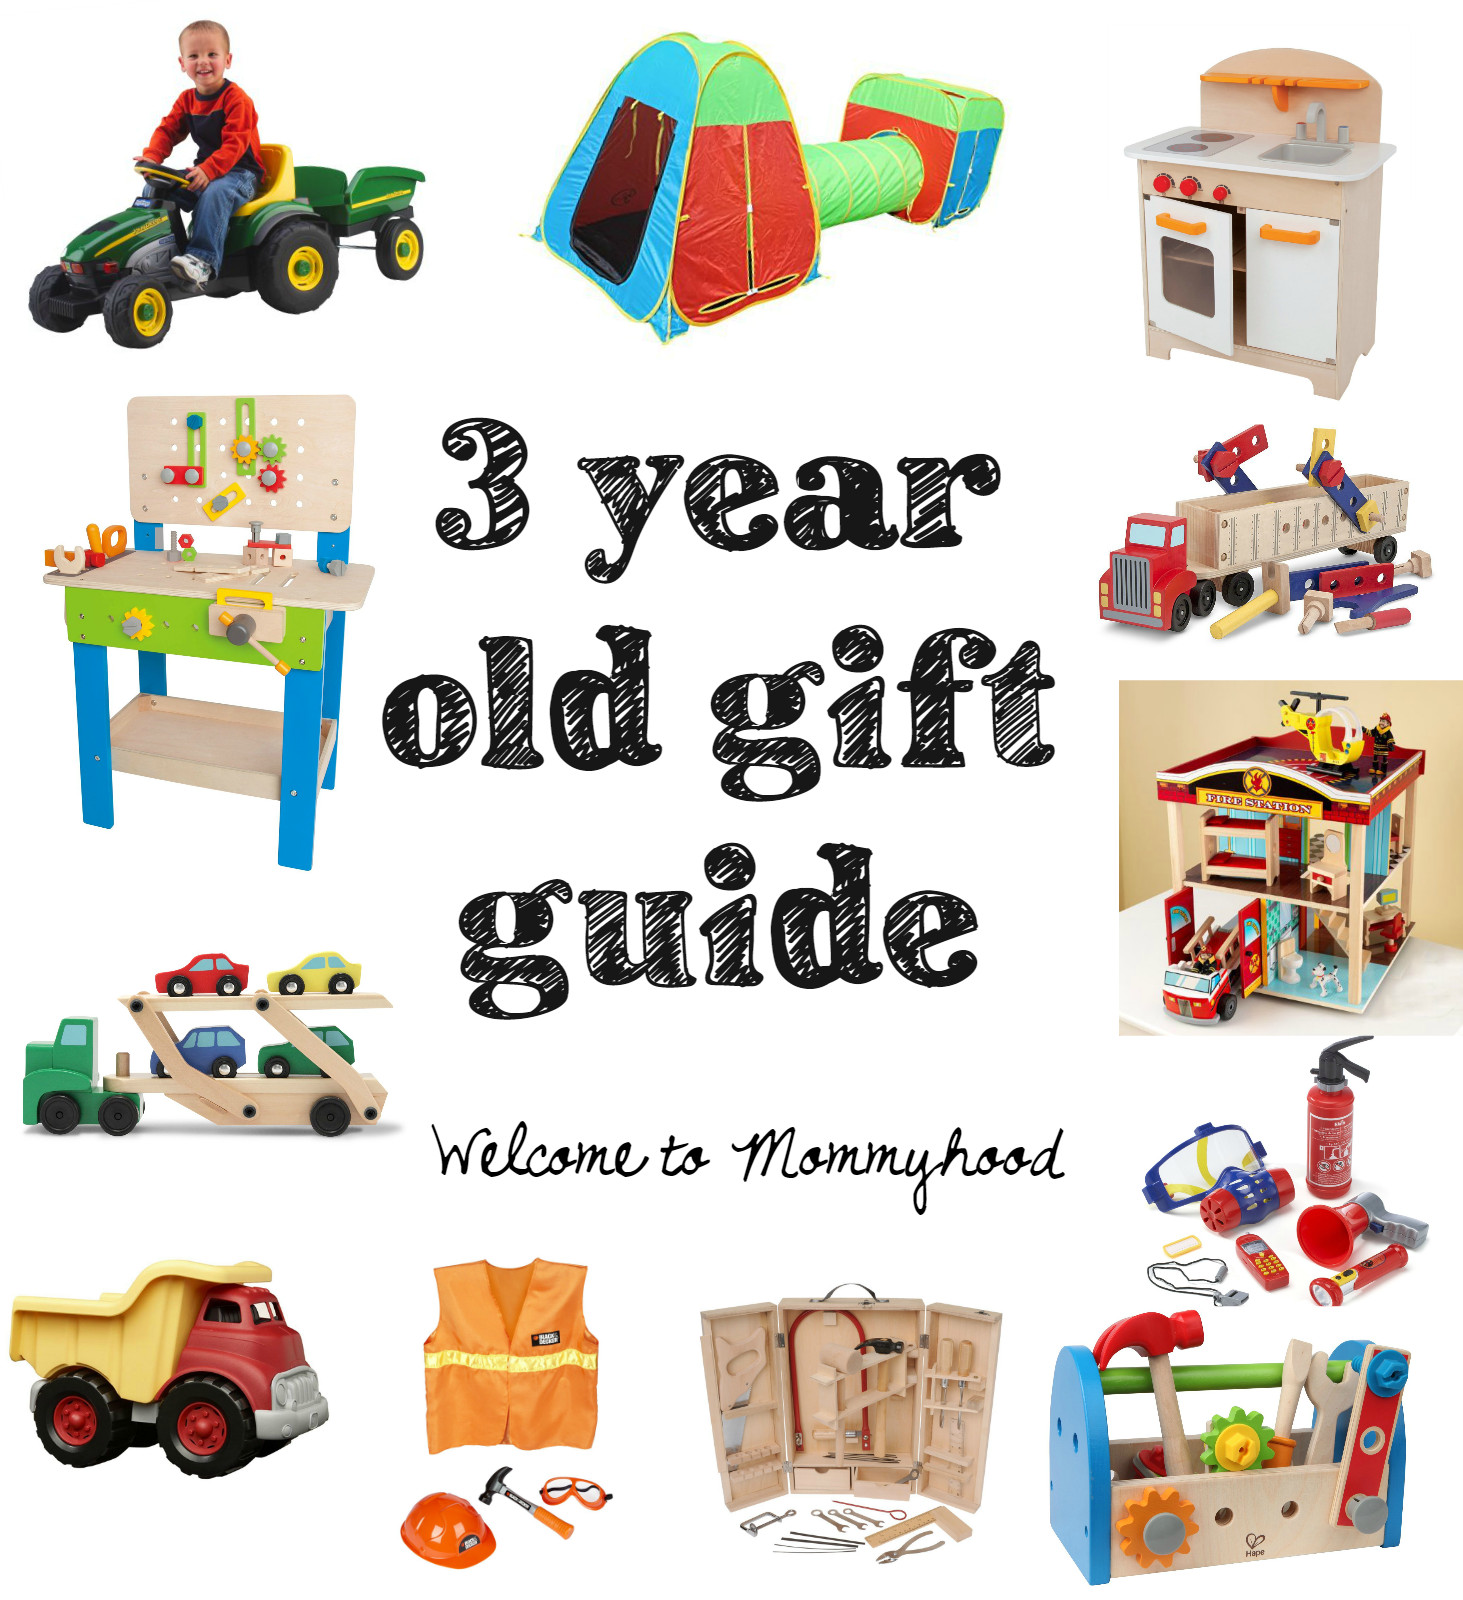 3 Year Old Christmas Gift Ideas
 Gift guide for three year old boys from Wel e to